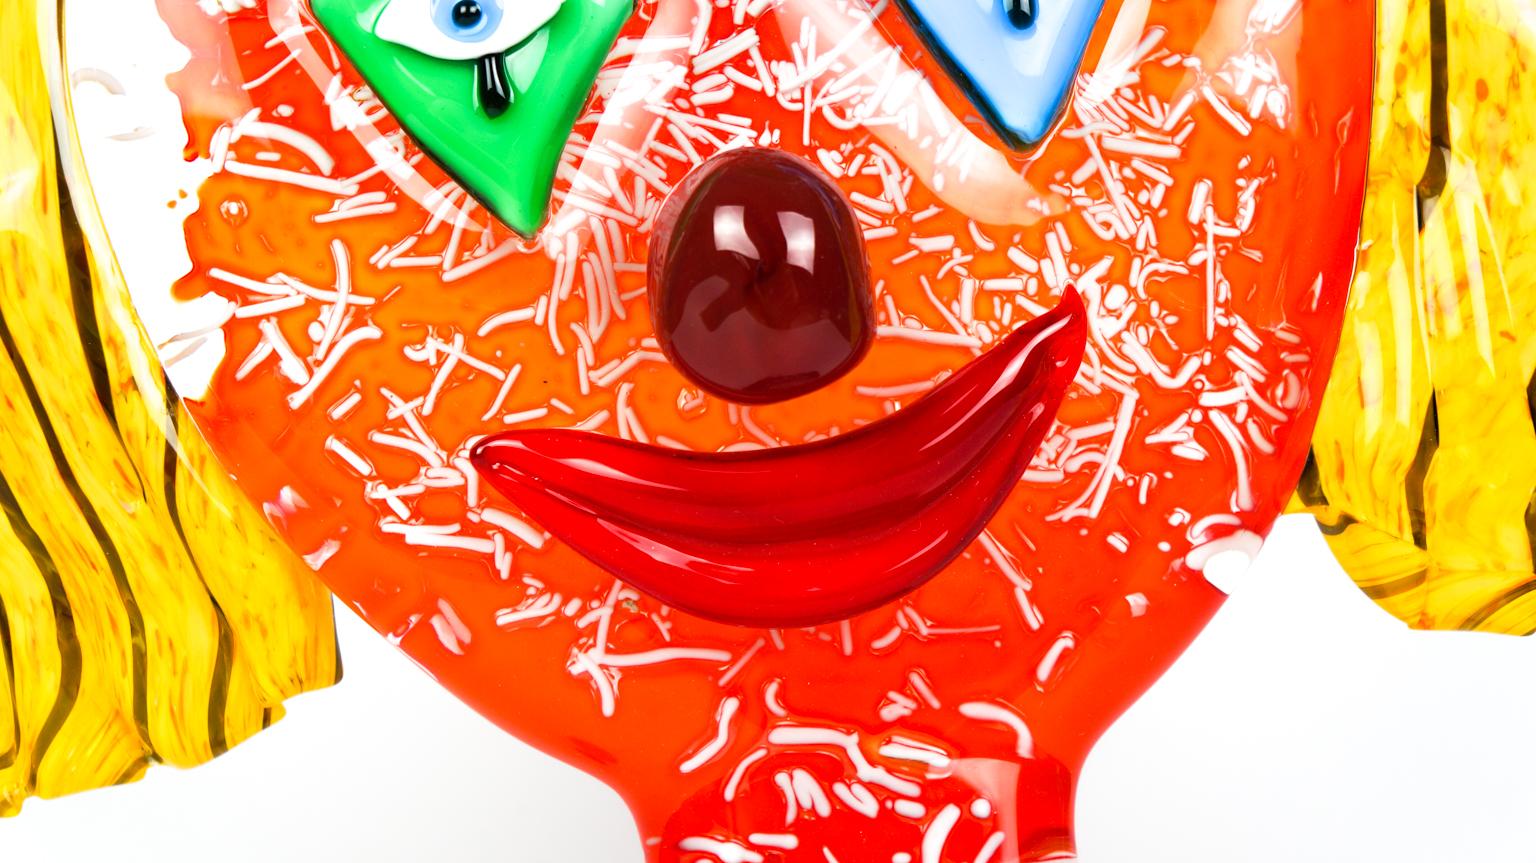 Abstract Sculpture Head Clown Murano Glass Pop Art by Badioli For Sale 11